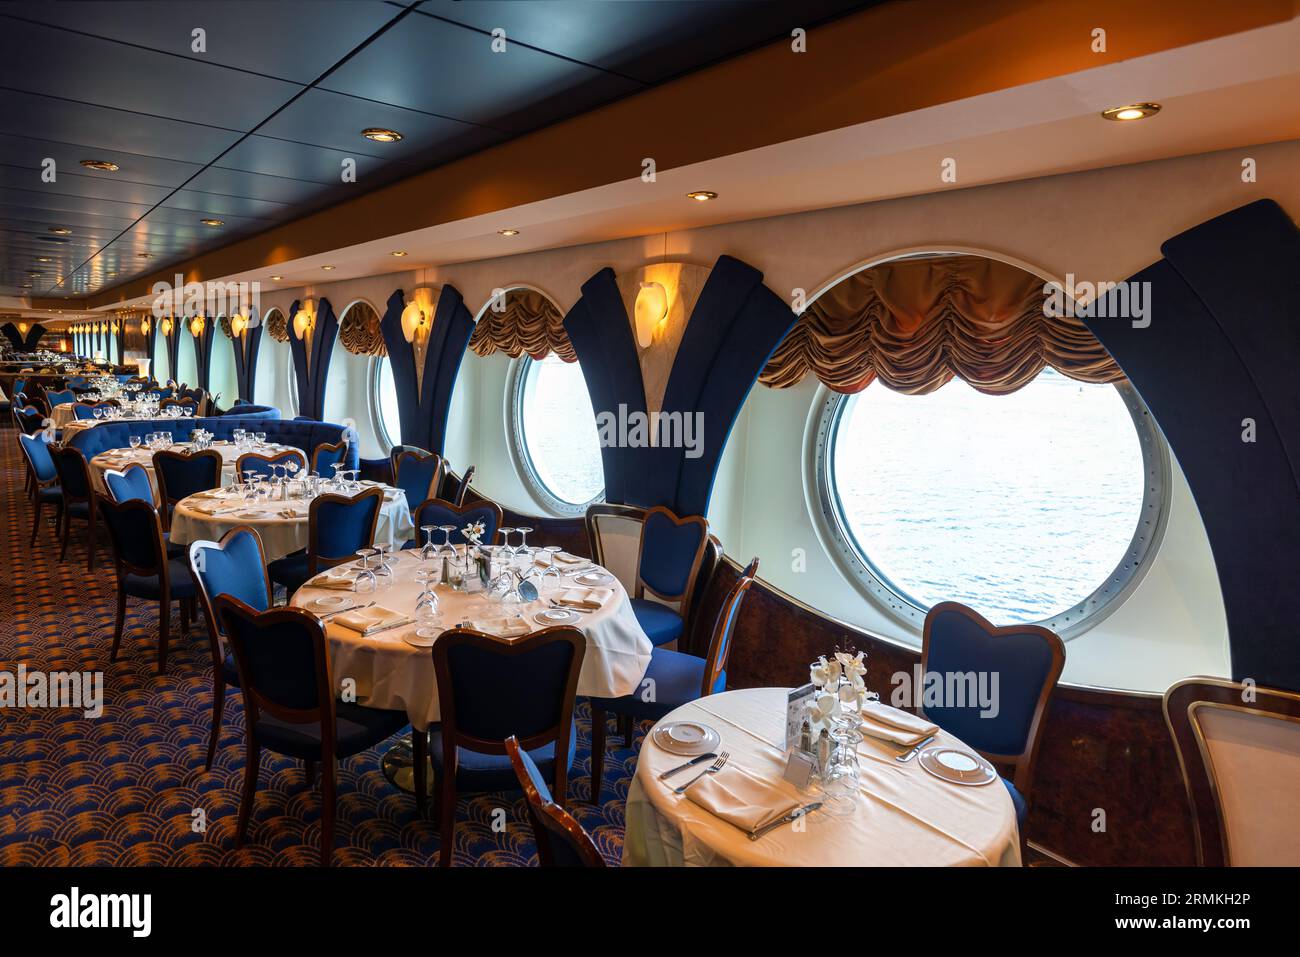 Luxury restaurant on a cruise ship that hosts dinners and entertainment events. Stock Photo